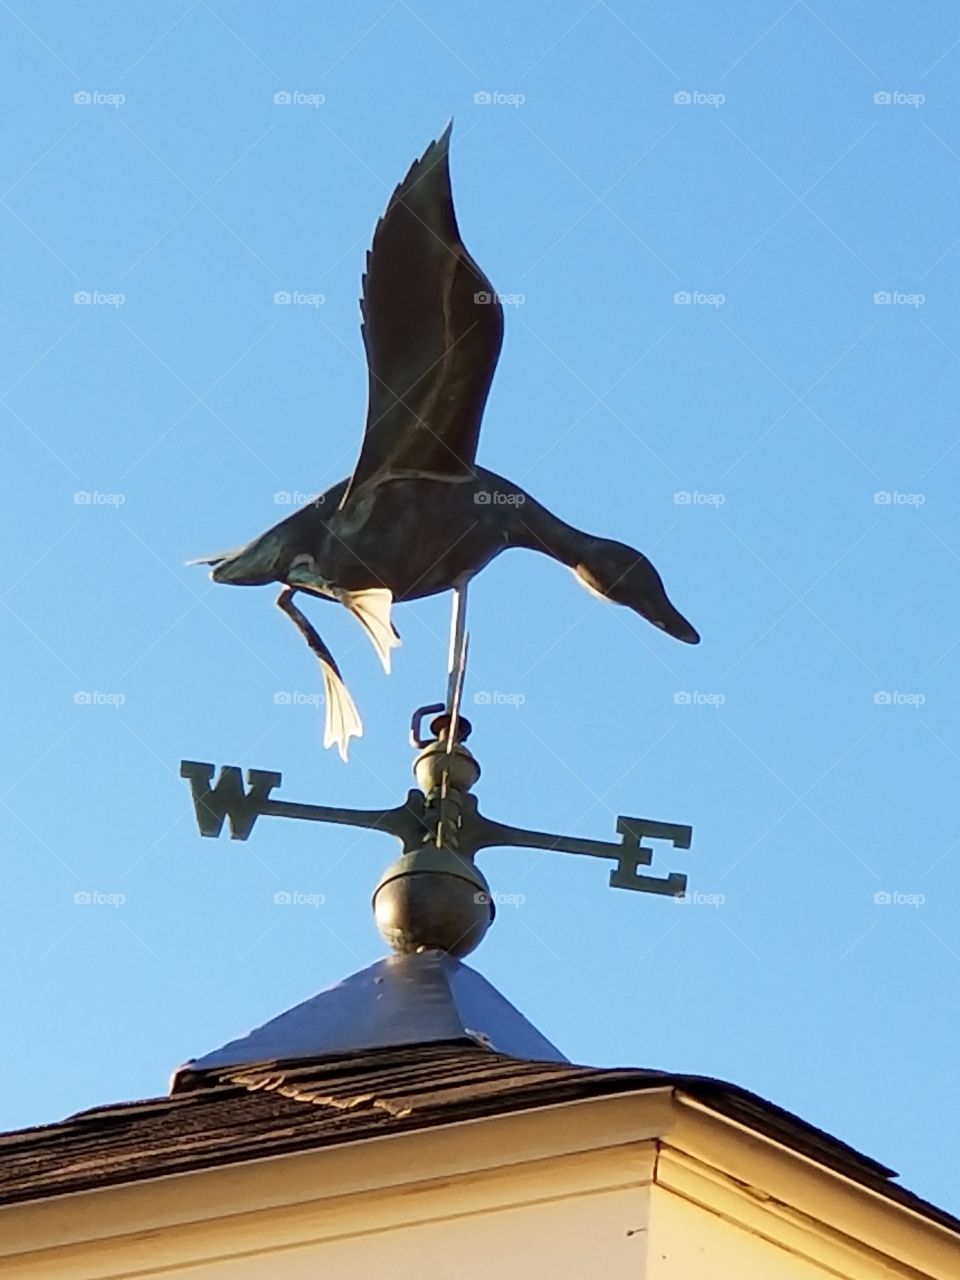 Weathervanes. my new obsession.